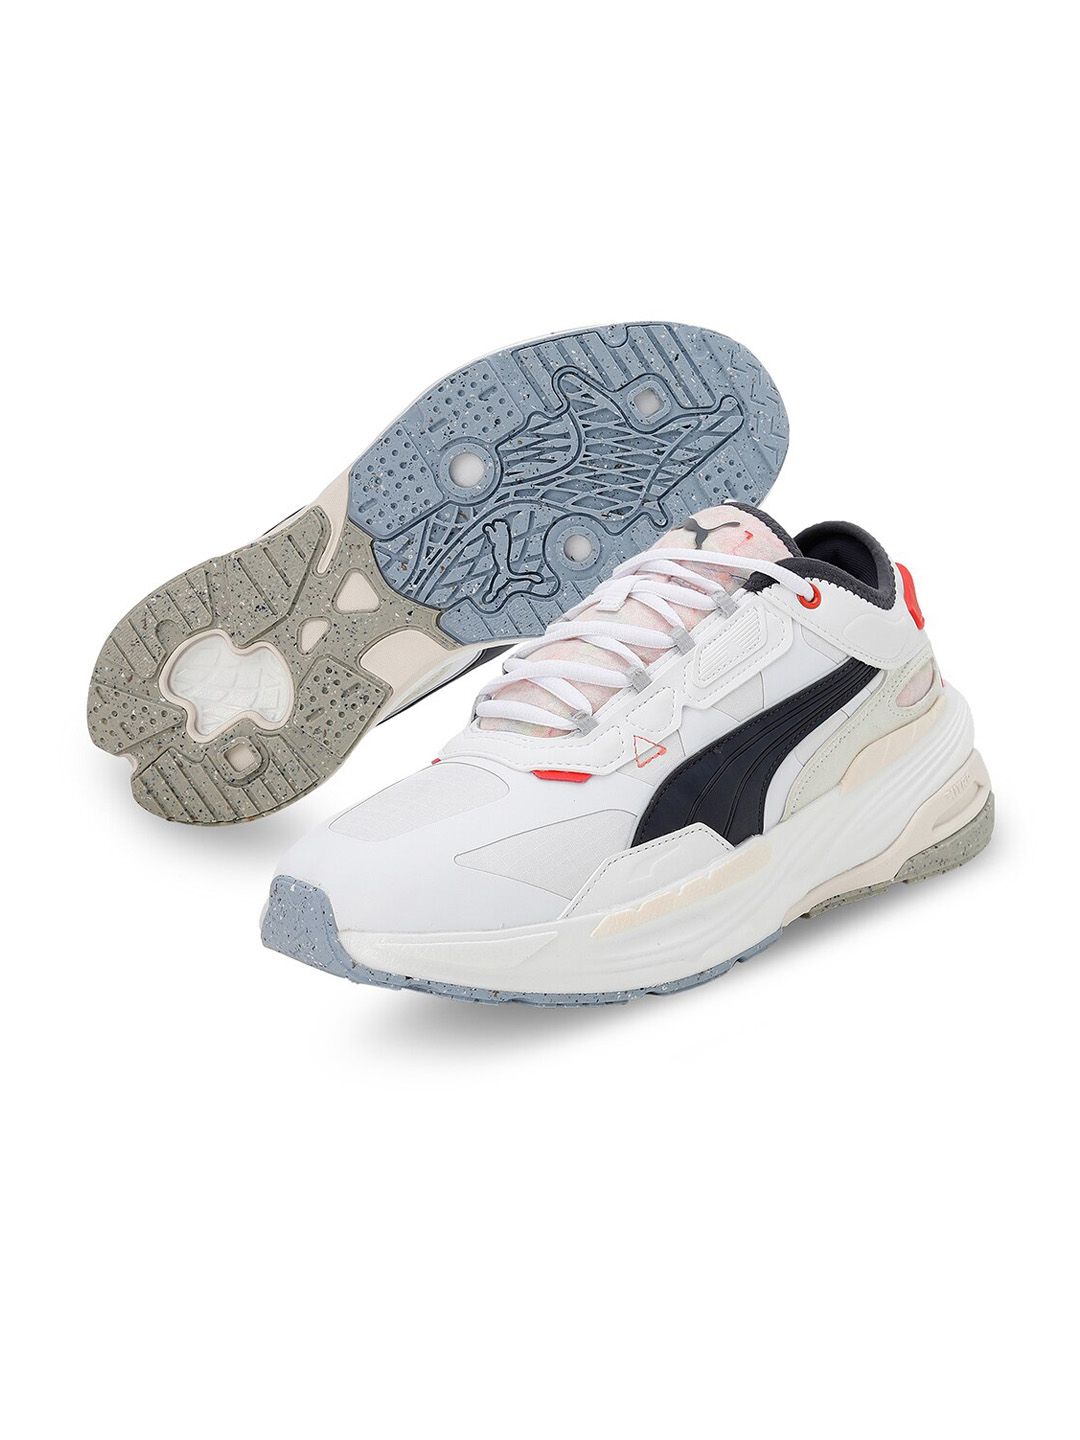 Puma White Extent Nitro Re:Collection Leather Sneakers Price in India